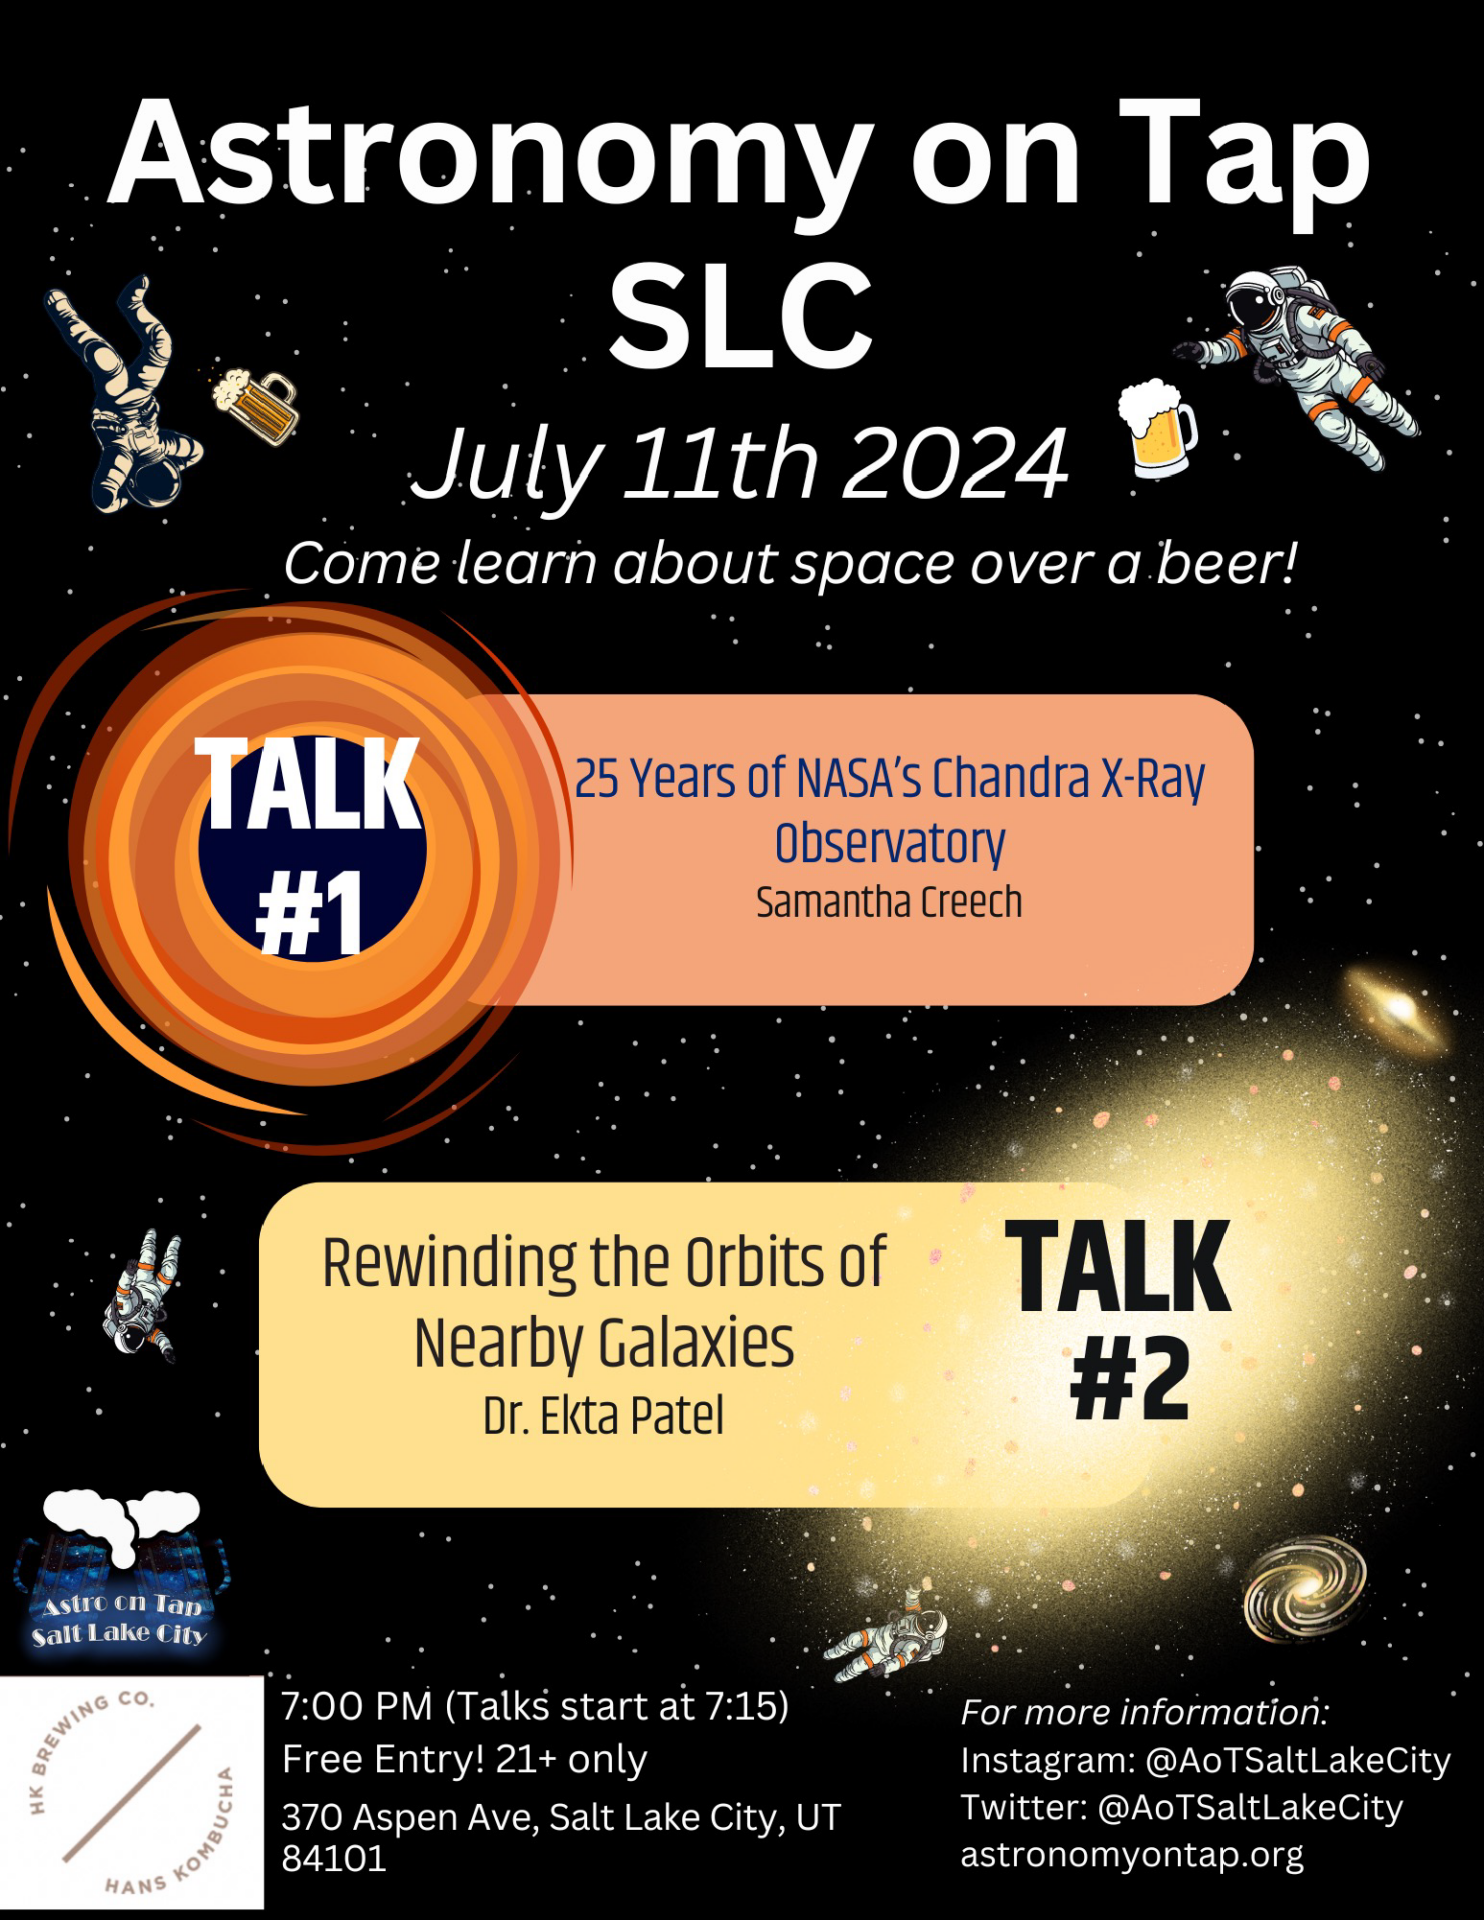 Astronomy on Tap SLC July